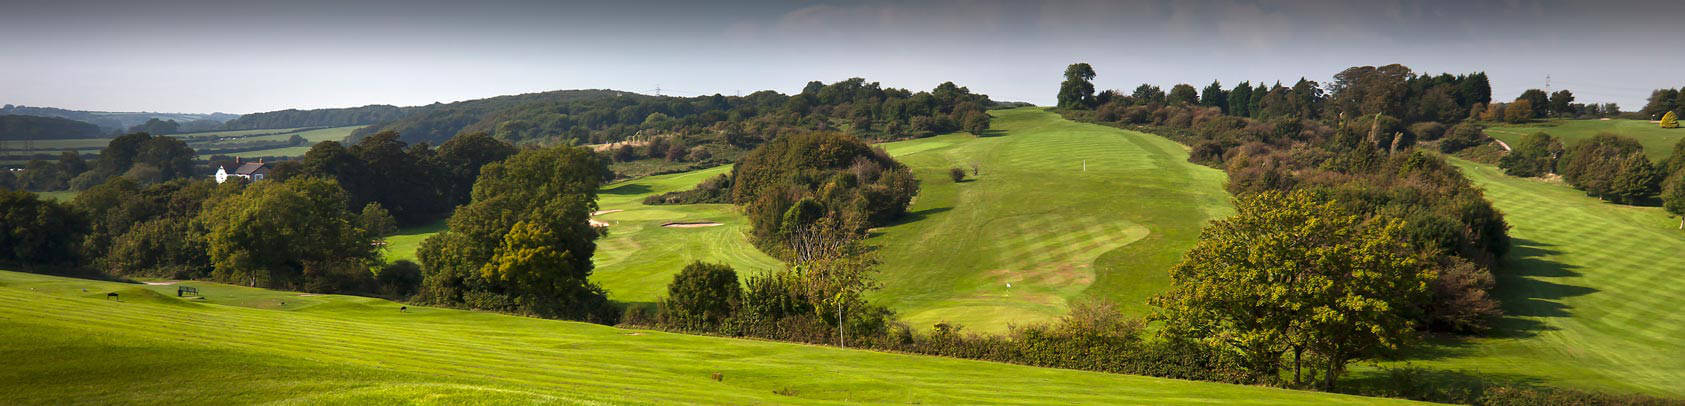 Golf Course in Wales near Cardiff